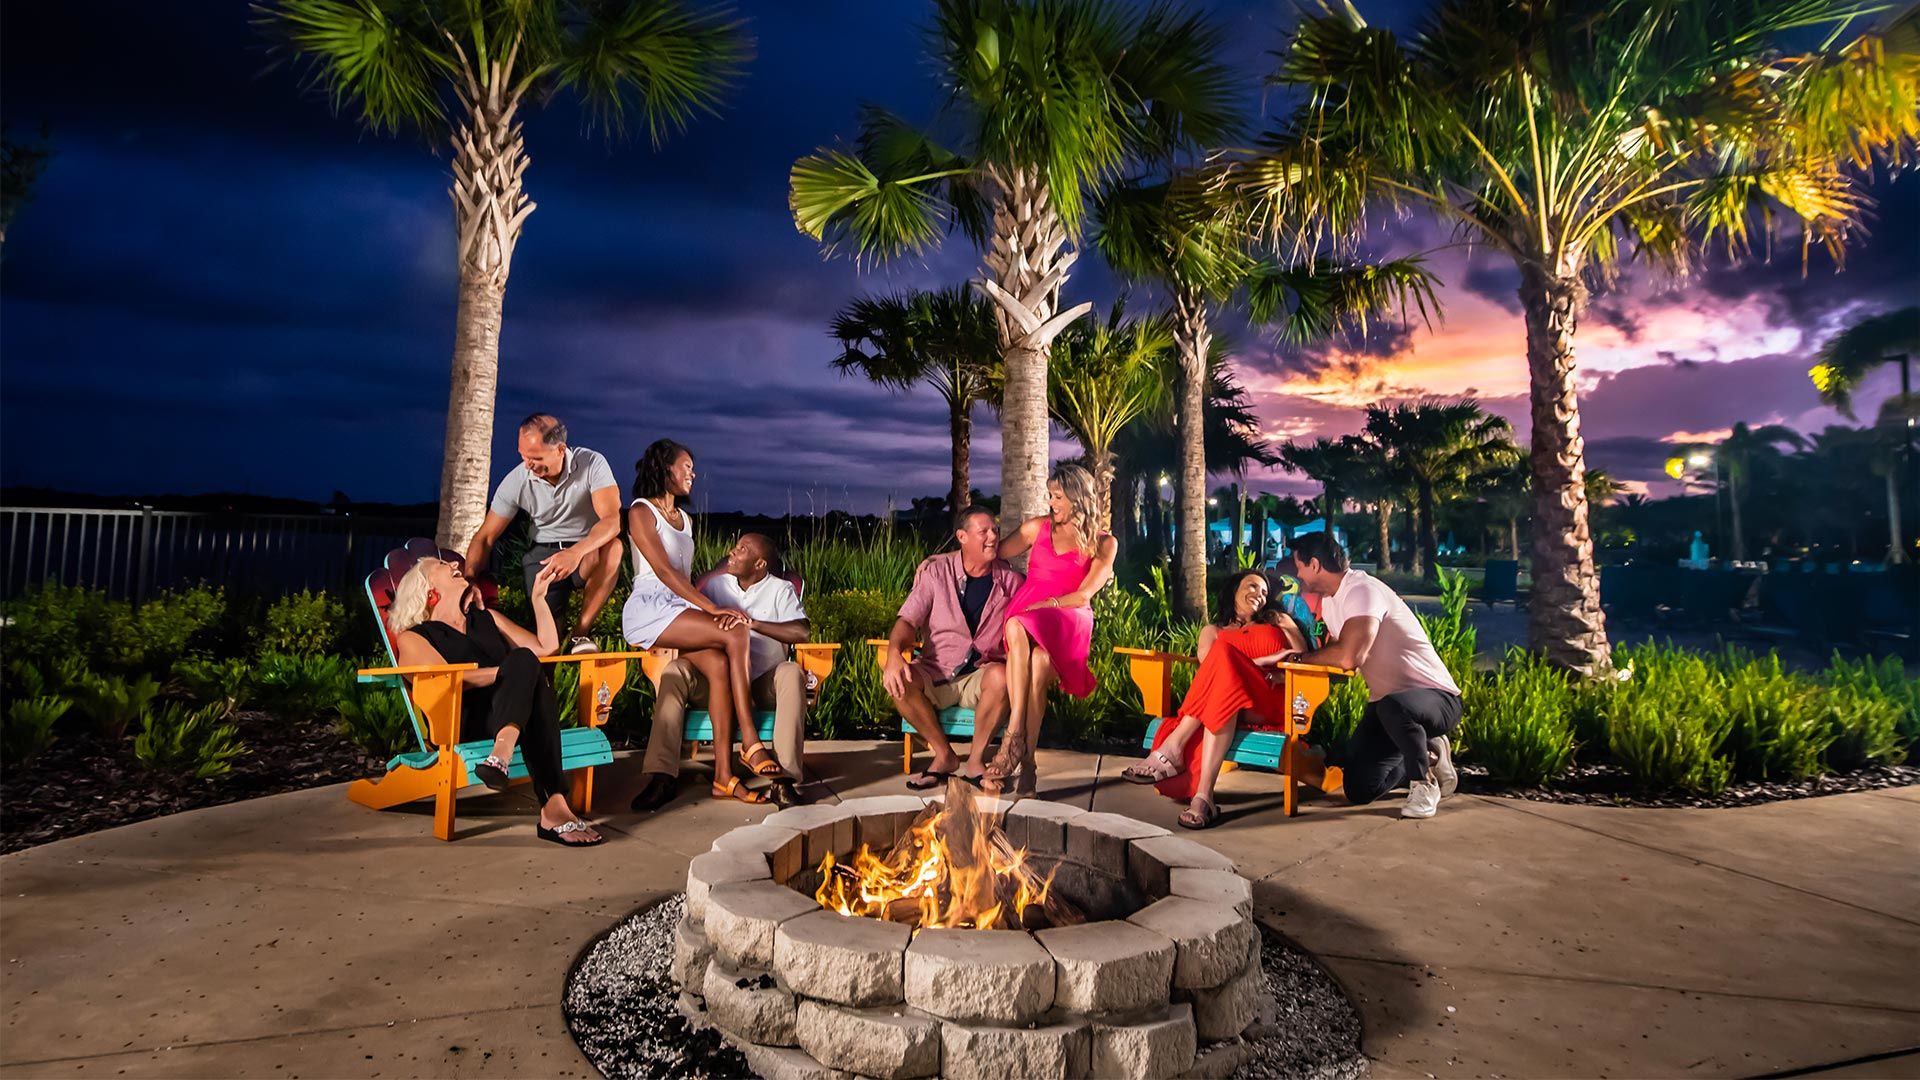 Couples gathered around a fire pit at night by the Salty Rim Bar & Grill at Margaritaville Resort Orlando.